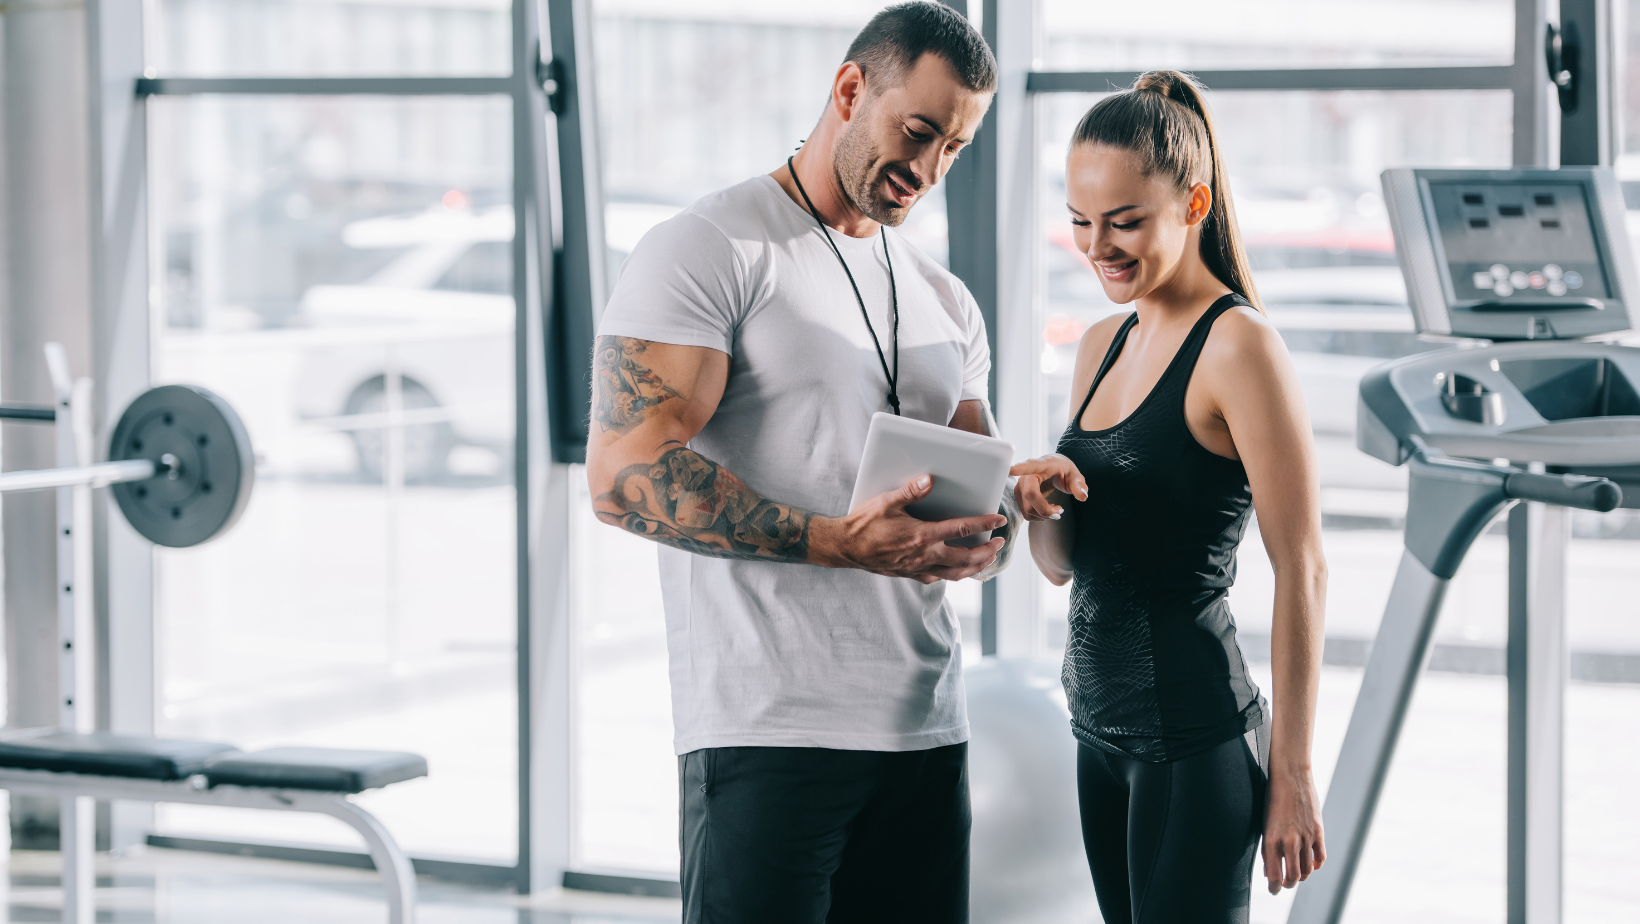 What are the Top 10 Benefits of Hiring a Personal Trainer